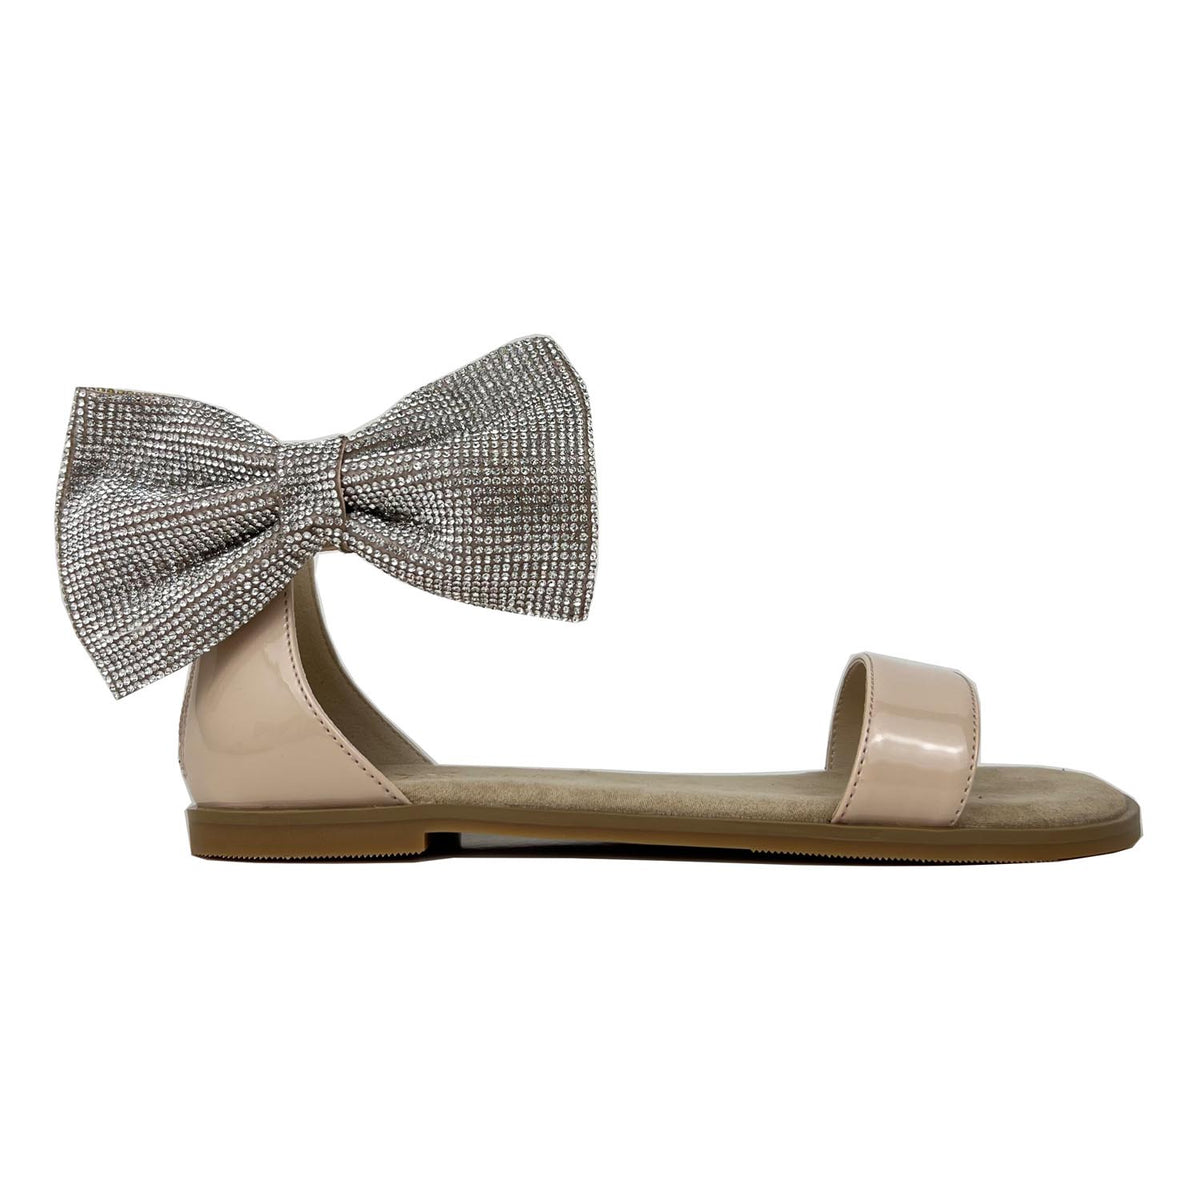 Miss Cambelle Crystal Bow Sandal in Blush Patent - Kids